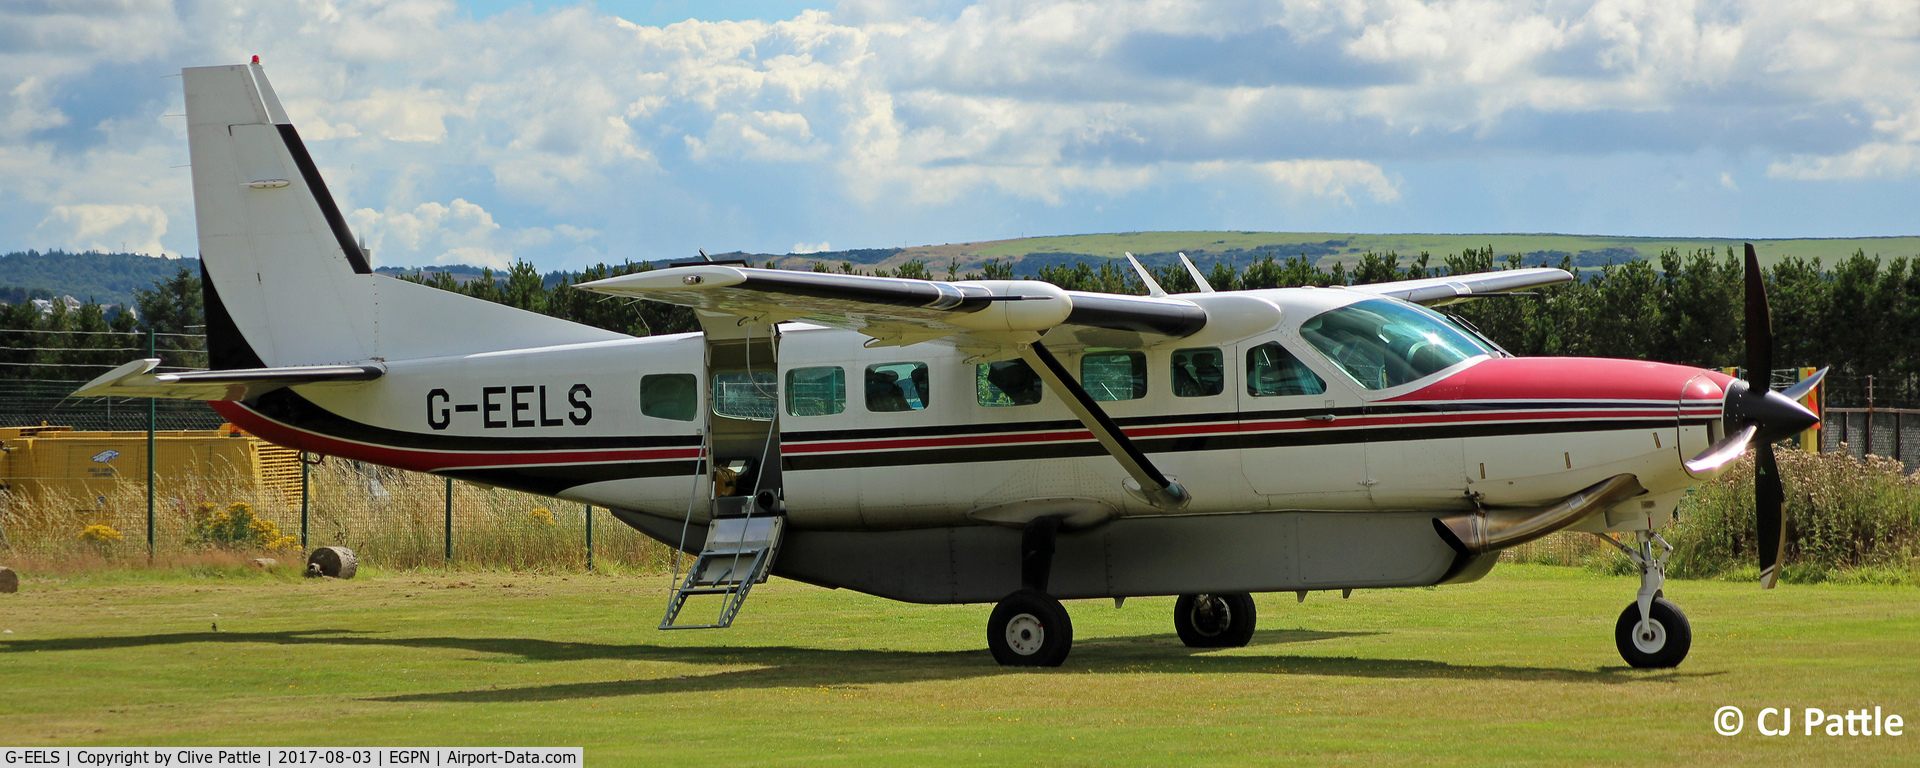 G-EELS, 1997 Cessna 208B Grand Caravan C/N 208B0619, On duty at Dundee for the Womens Open Golf Champs at nearby Kingsbarns.